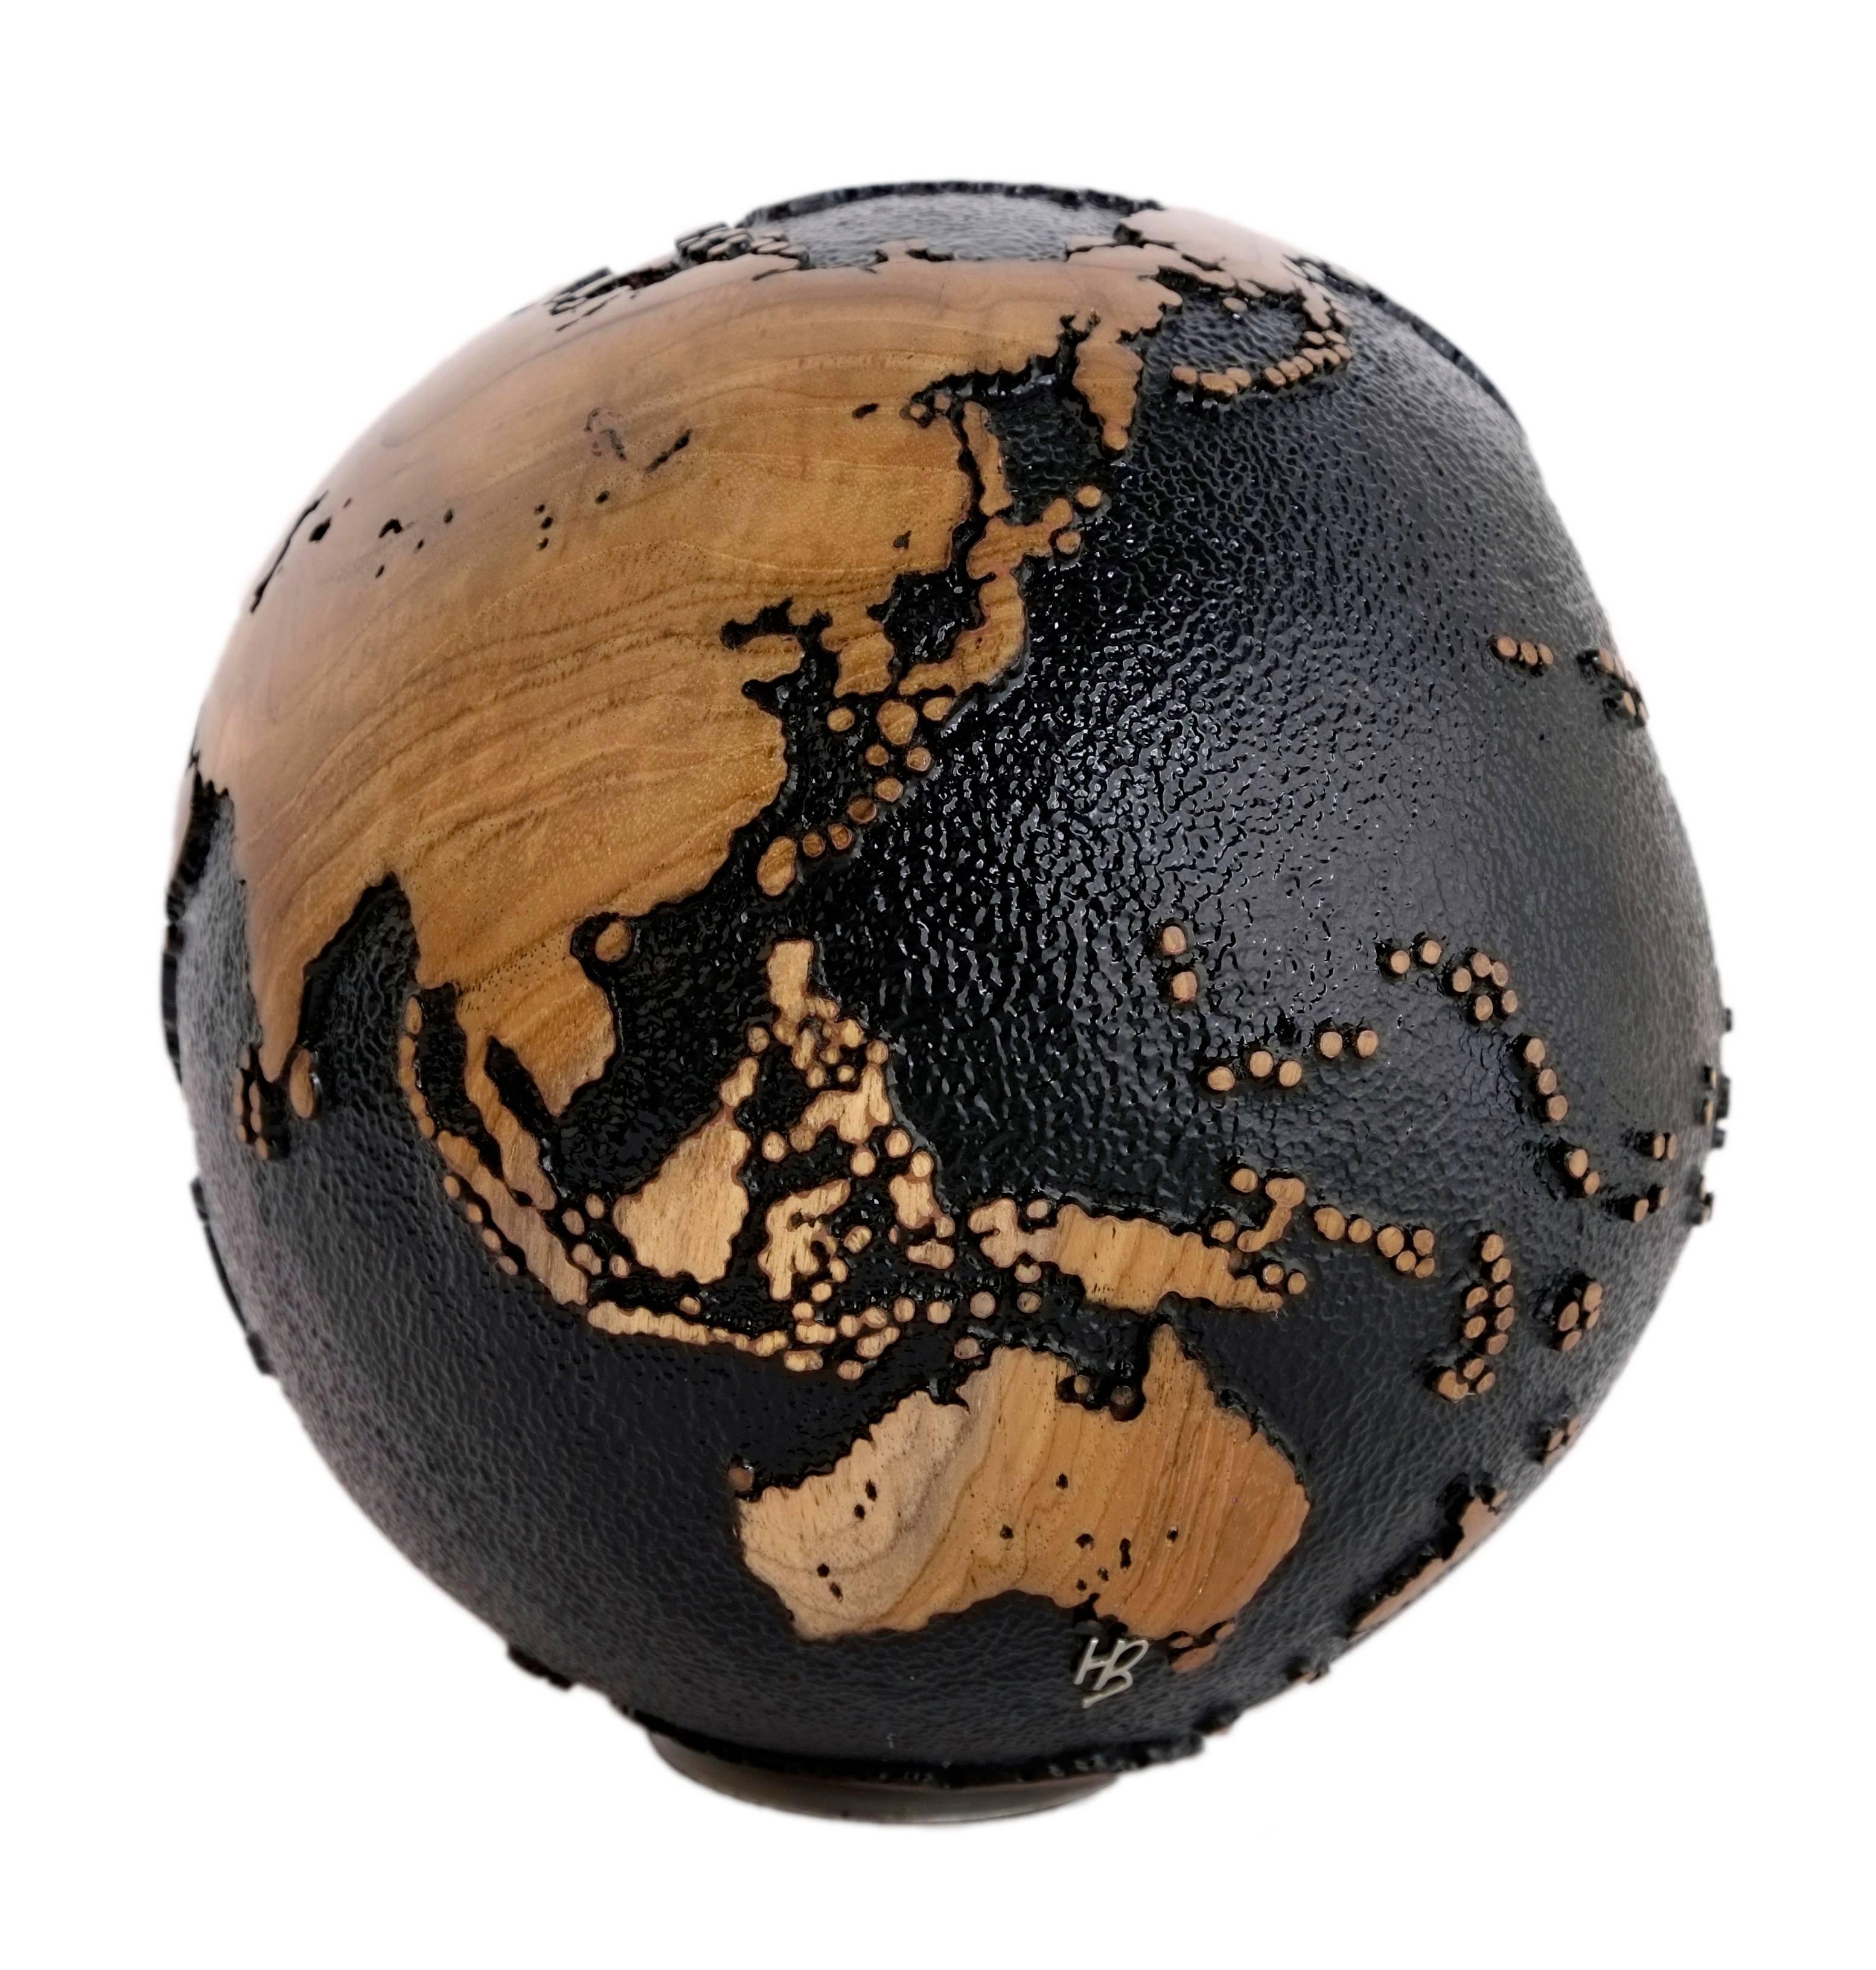 Organic Modern Superb Black Beauty Wooden Globe with 79 Stainless Bolts, 20 cm, Saturday Sale For Sale